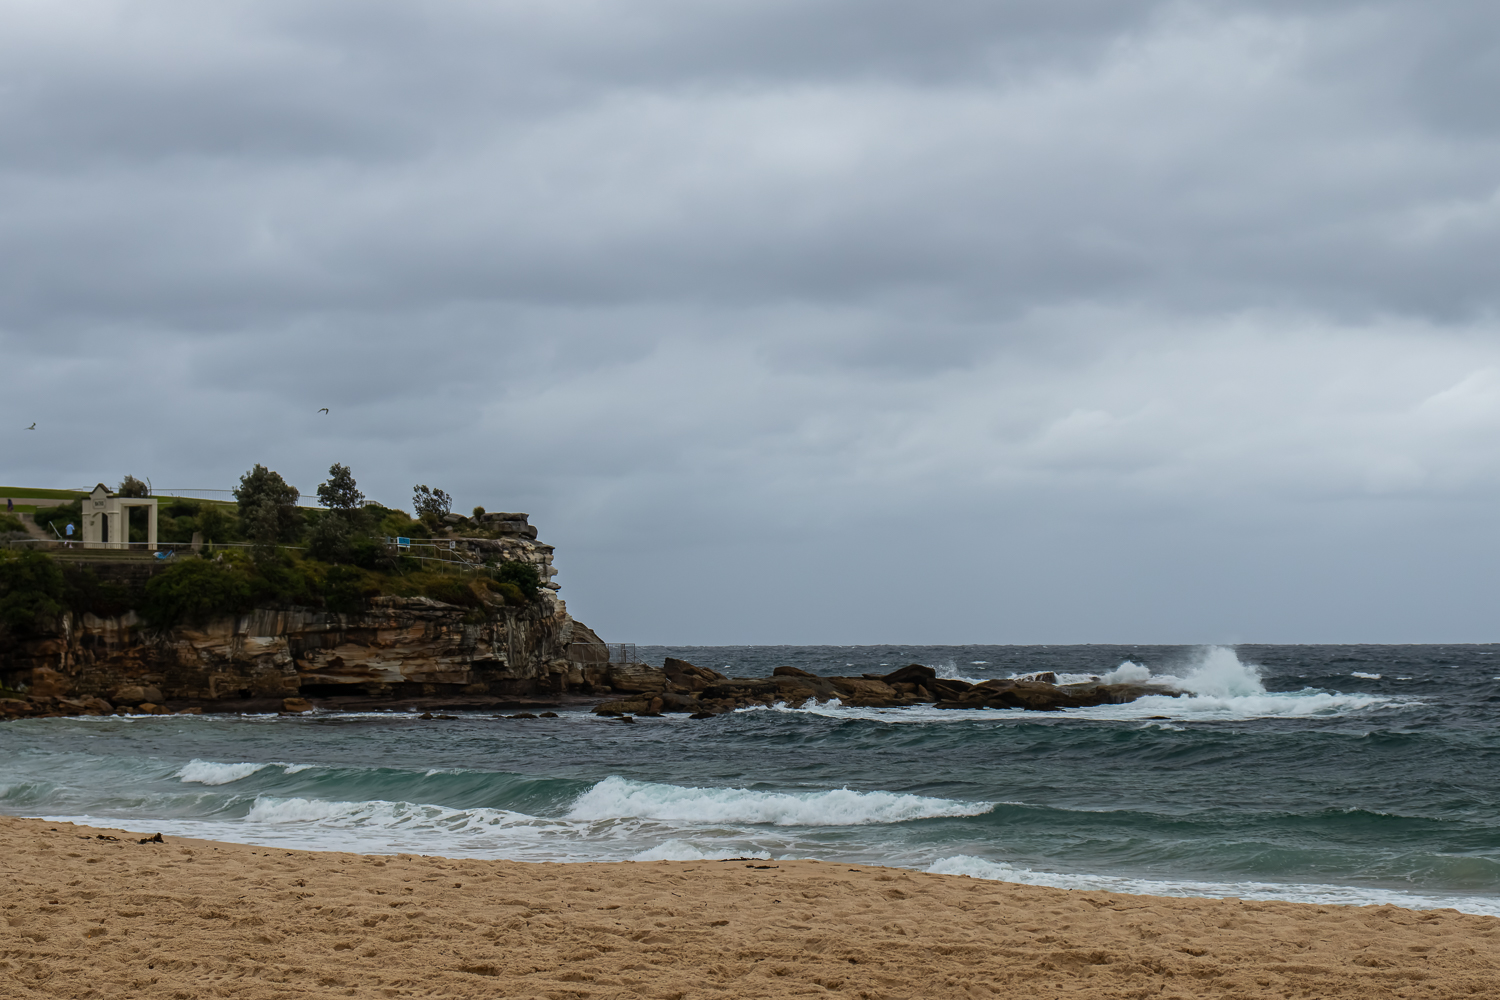 A beach and a small cliff with a small wave, on an overcast day